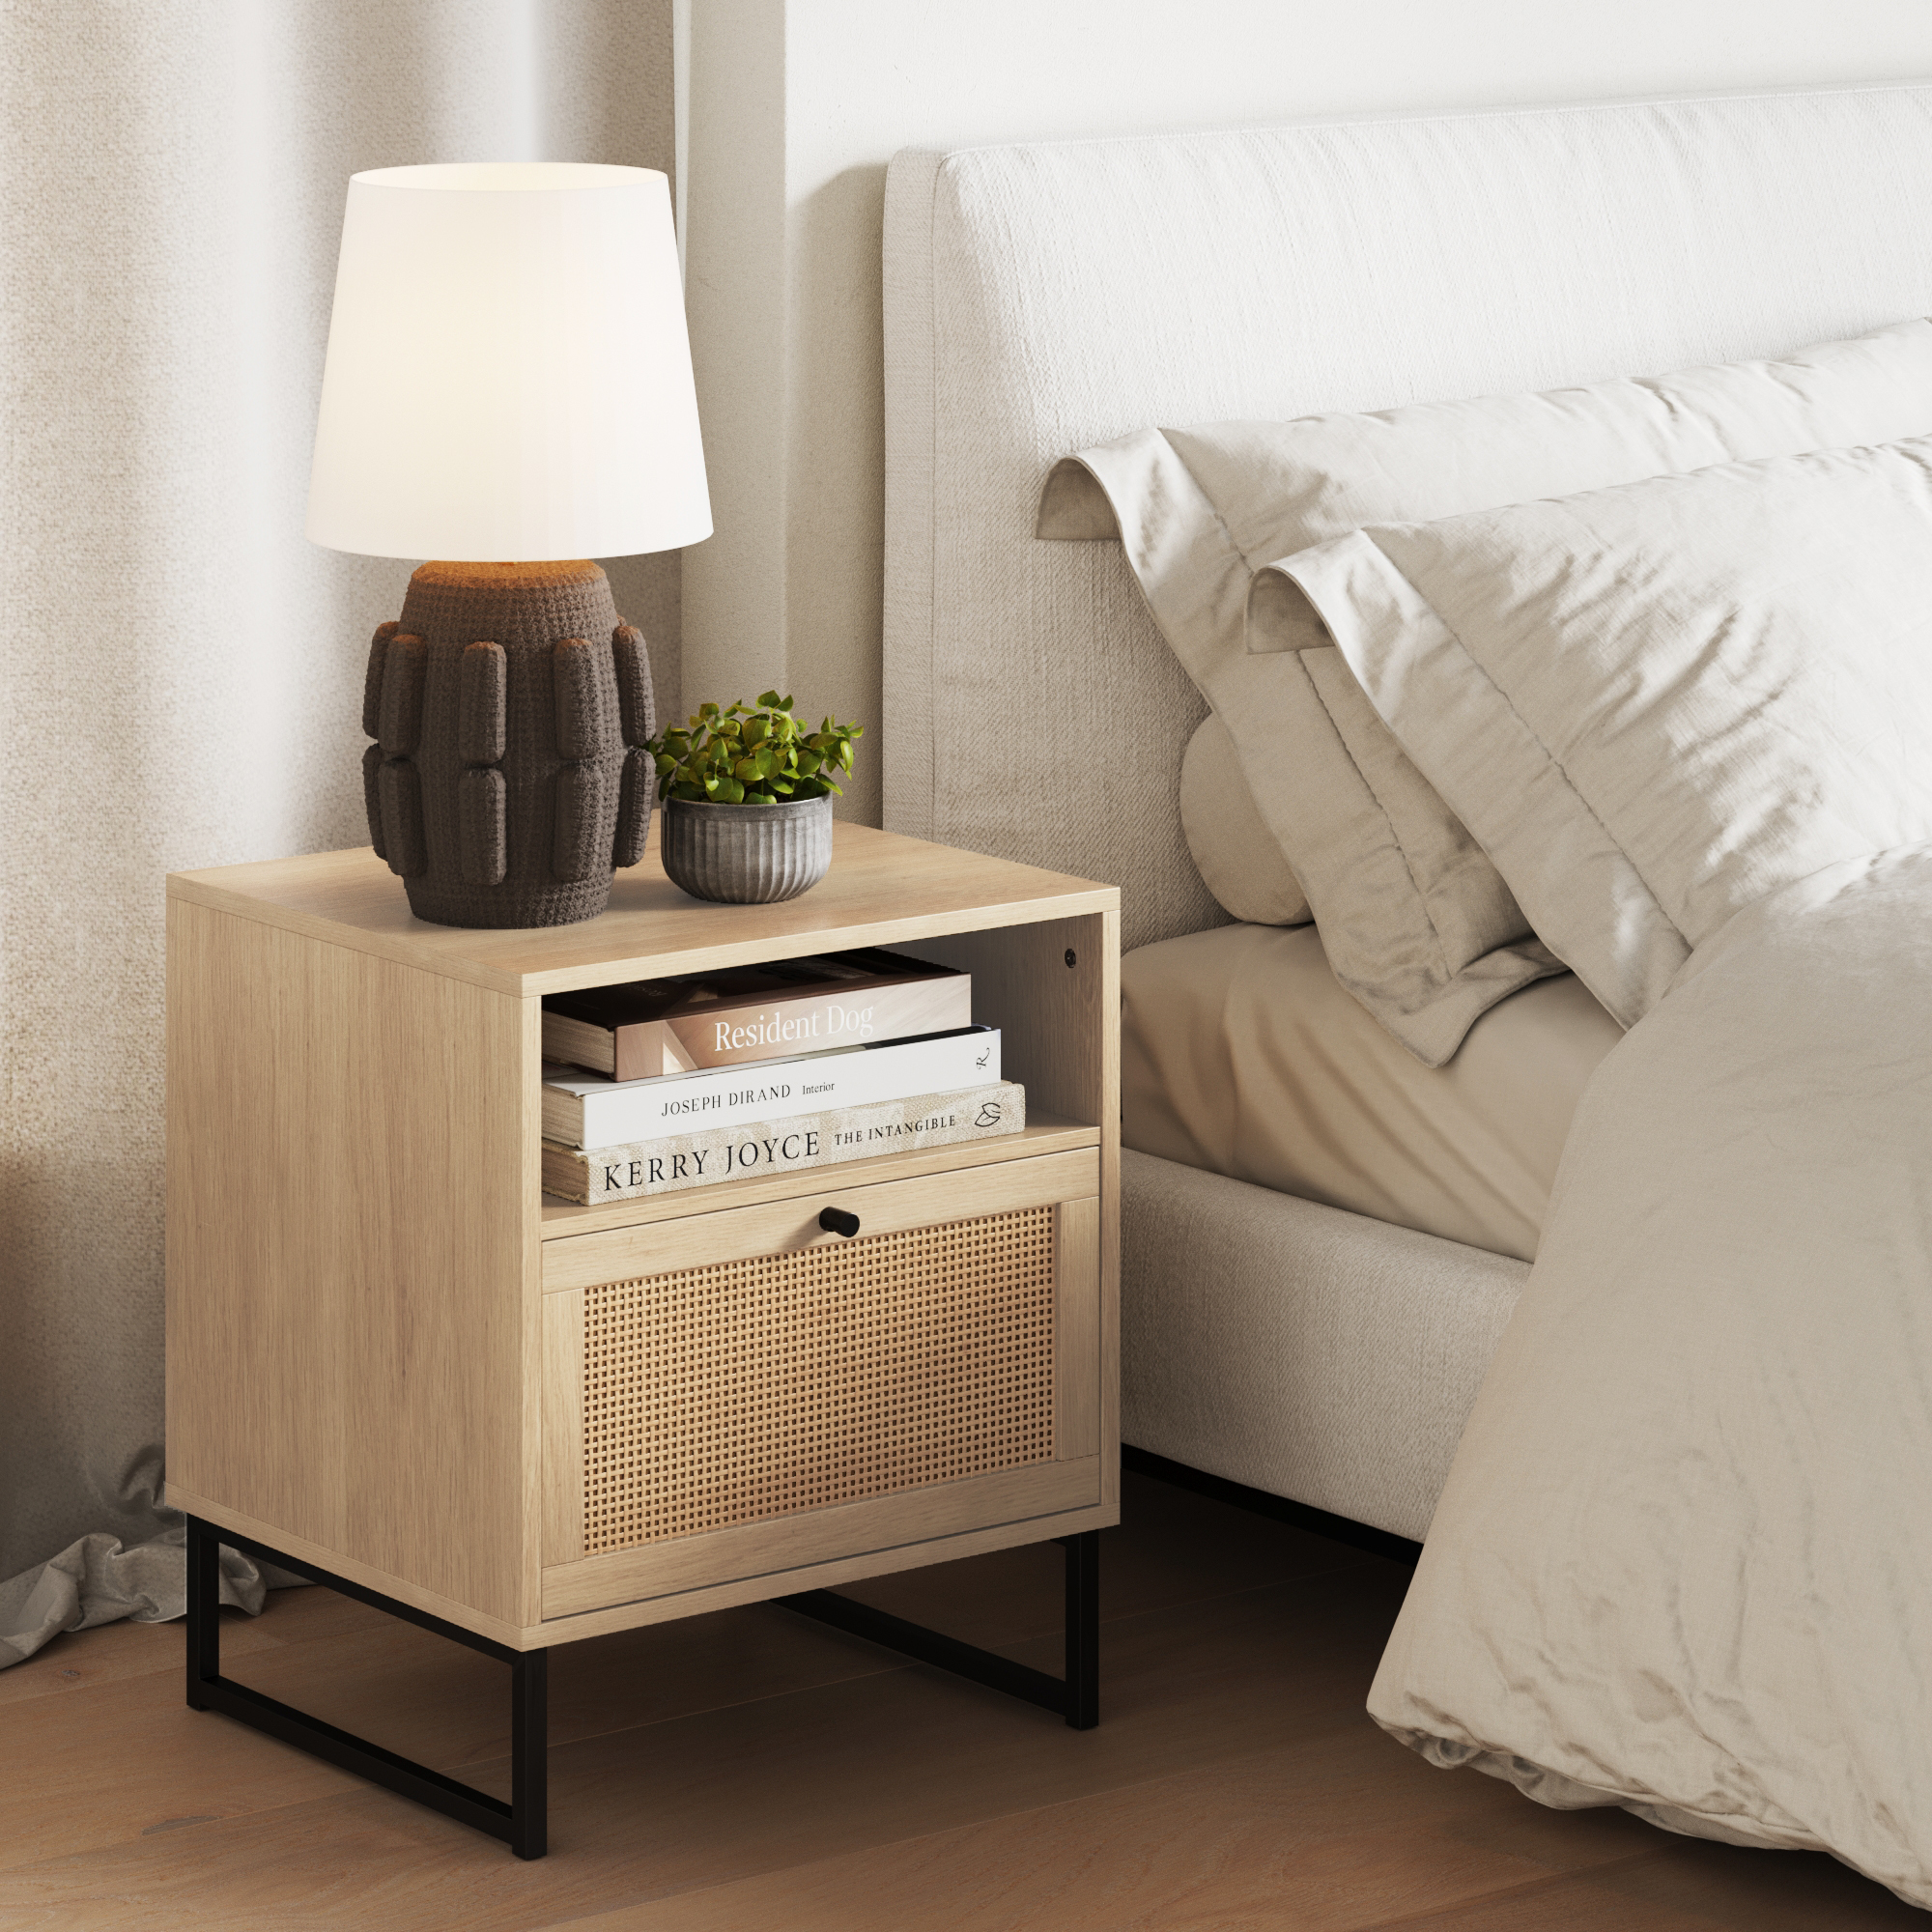 Nathan James Mina Natural Oak Wood Black Accent with Storage Living Room End Table or Bedroom Nightstand - image 1 of 7